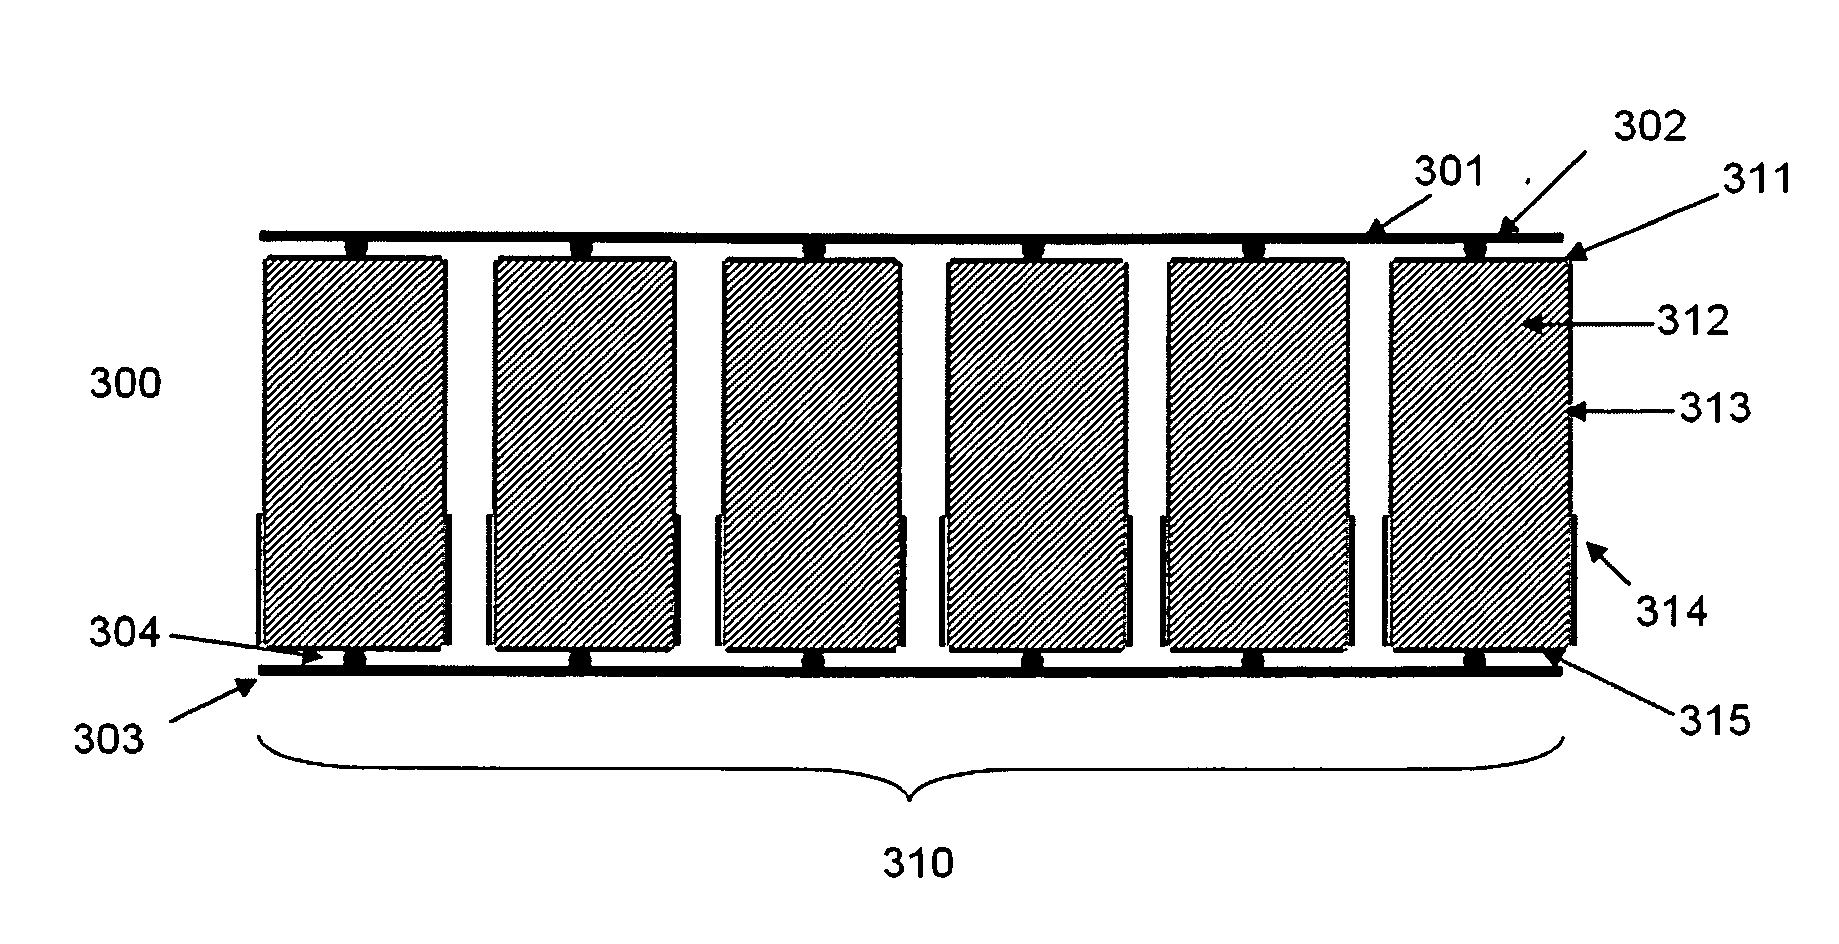 Array of virtual frisch-grid detectors with common cathode and reduced length of shielding electrodes